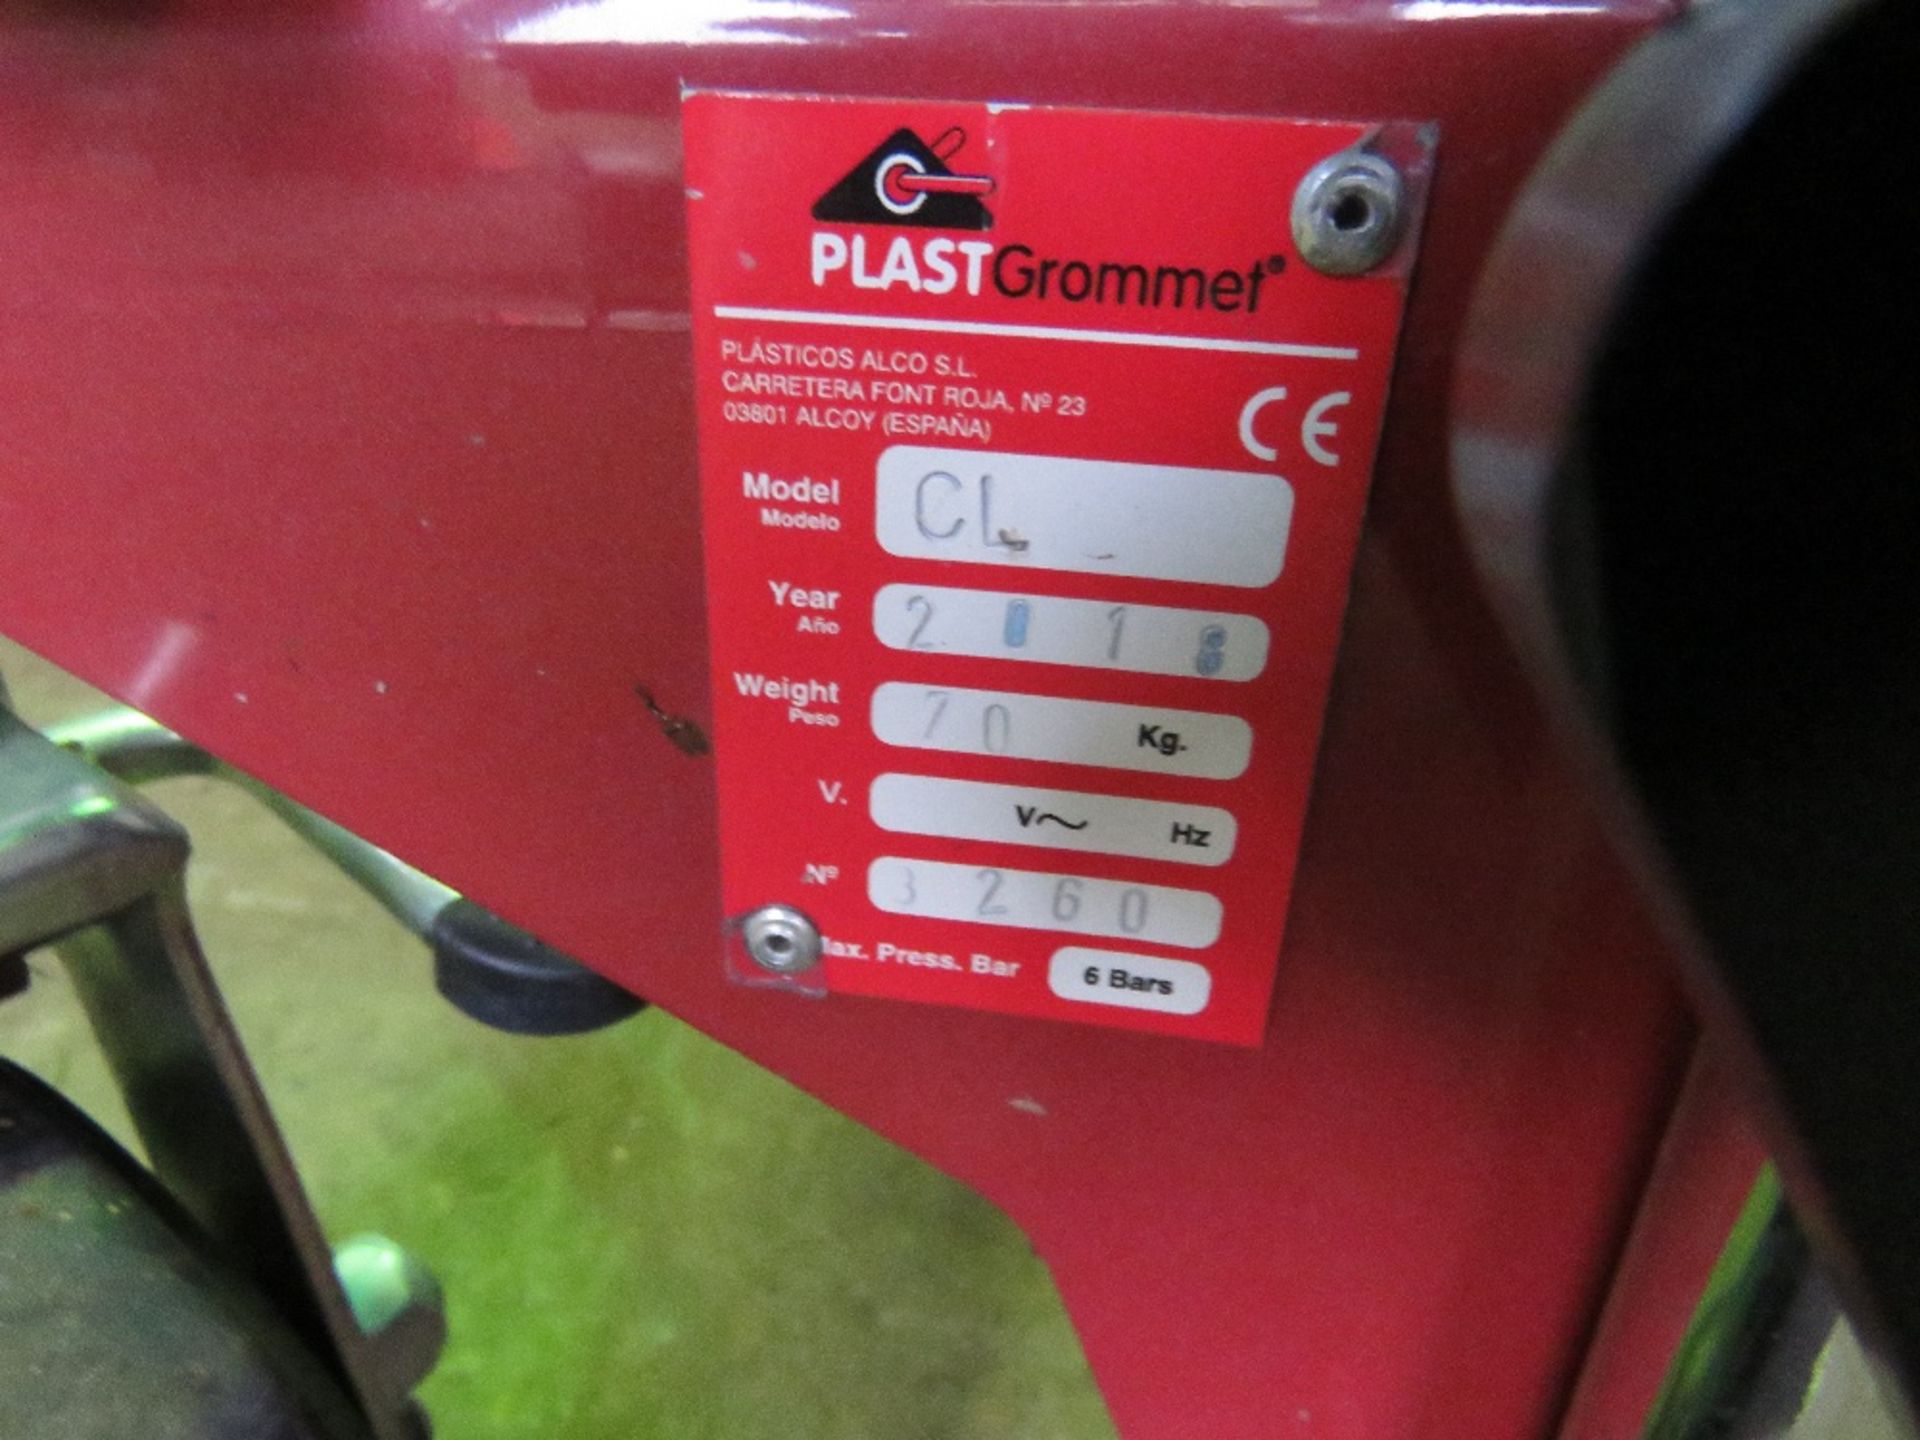 PLAST GROMMET COMPACT HYDRAULIC LIFT TRUCK, APPEARS LITTLE USED, FOOT OPERATED. WHEN TESTED WAS SEEN - Image 4 of 5